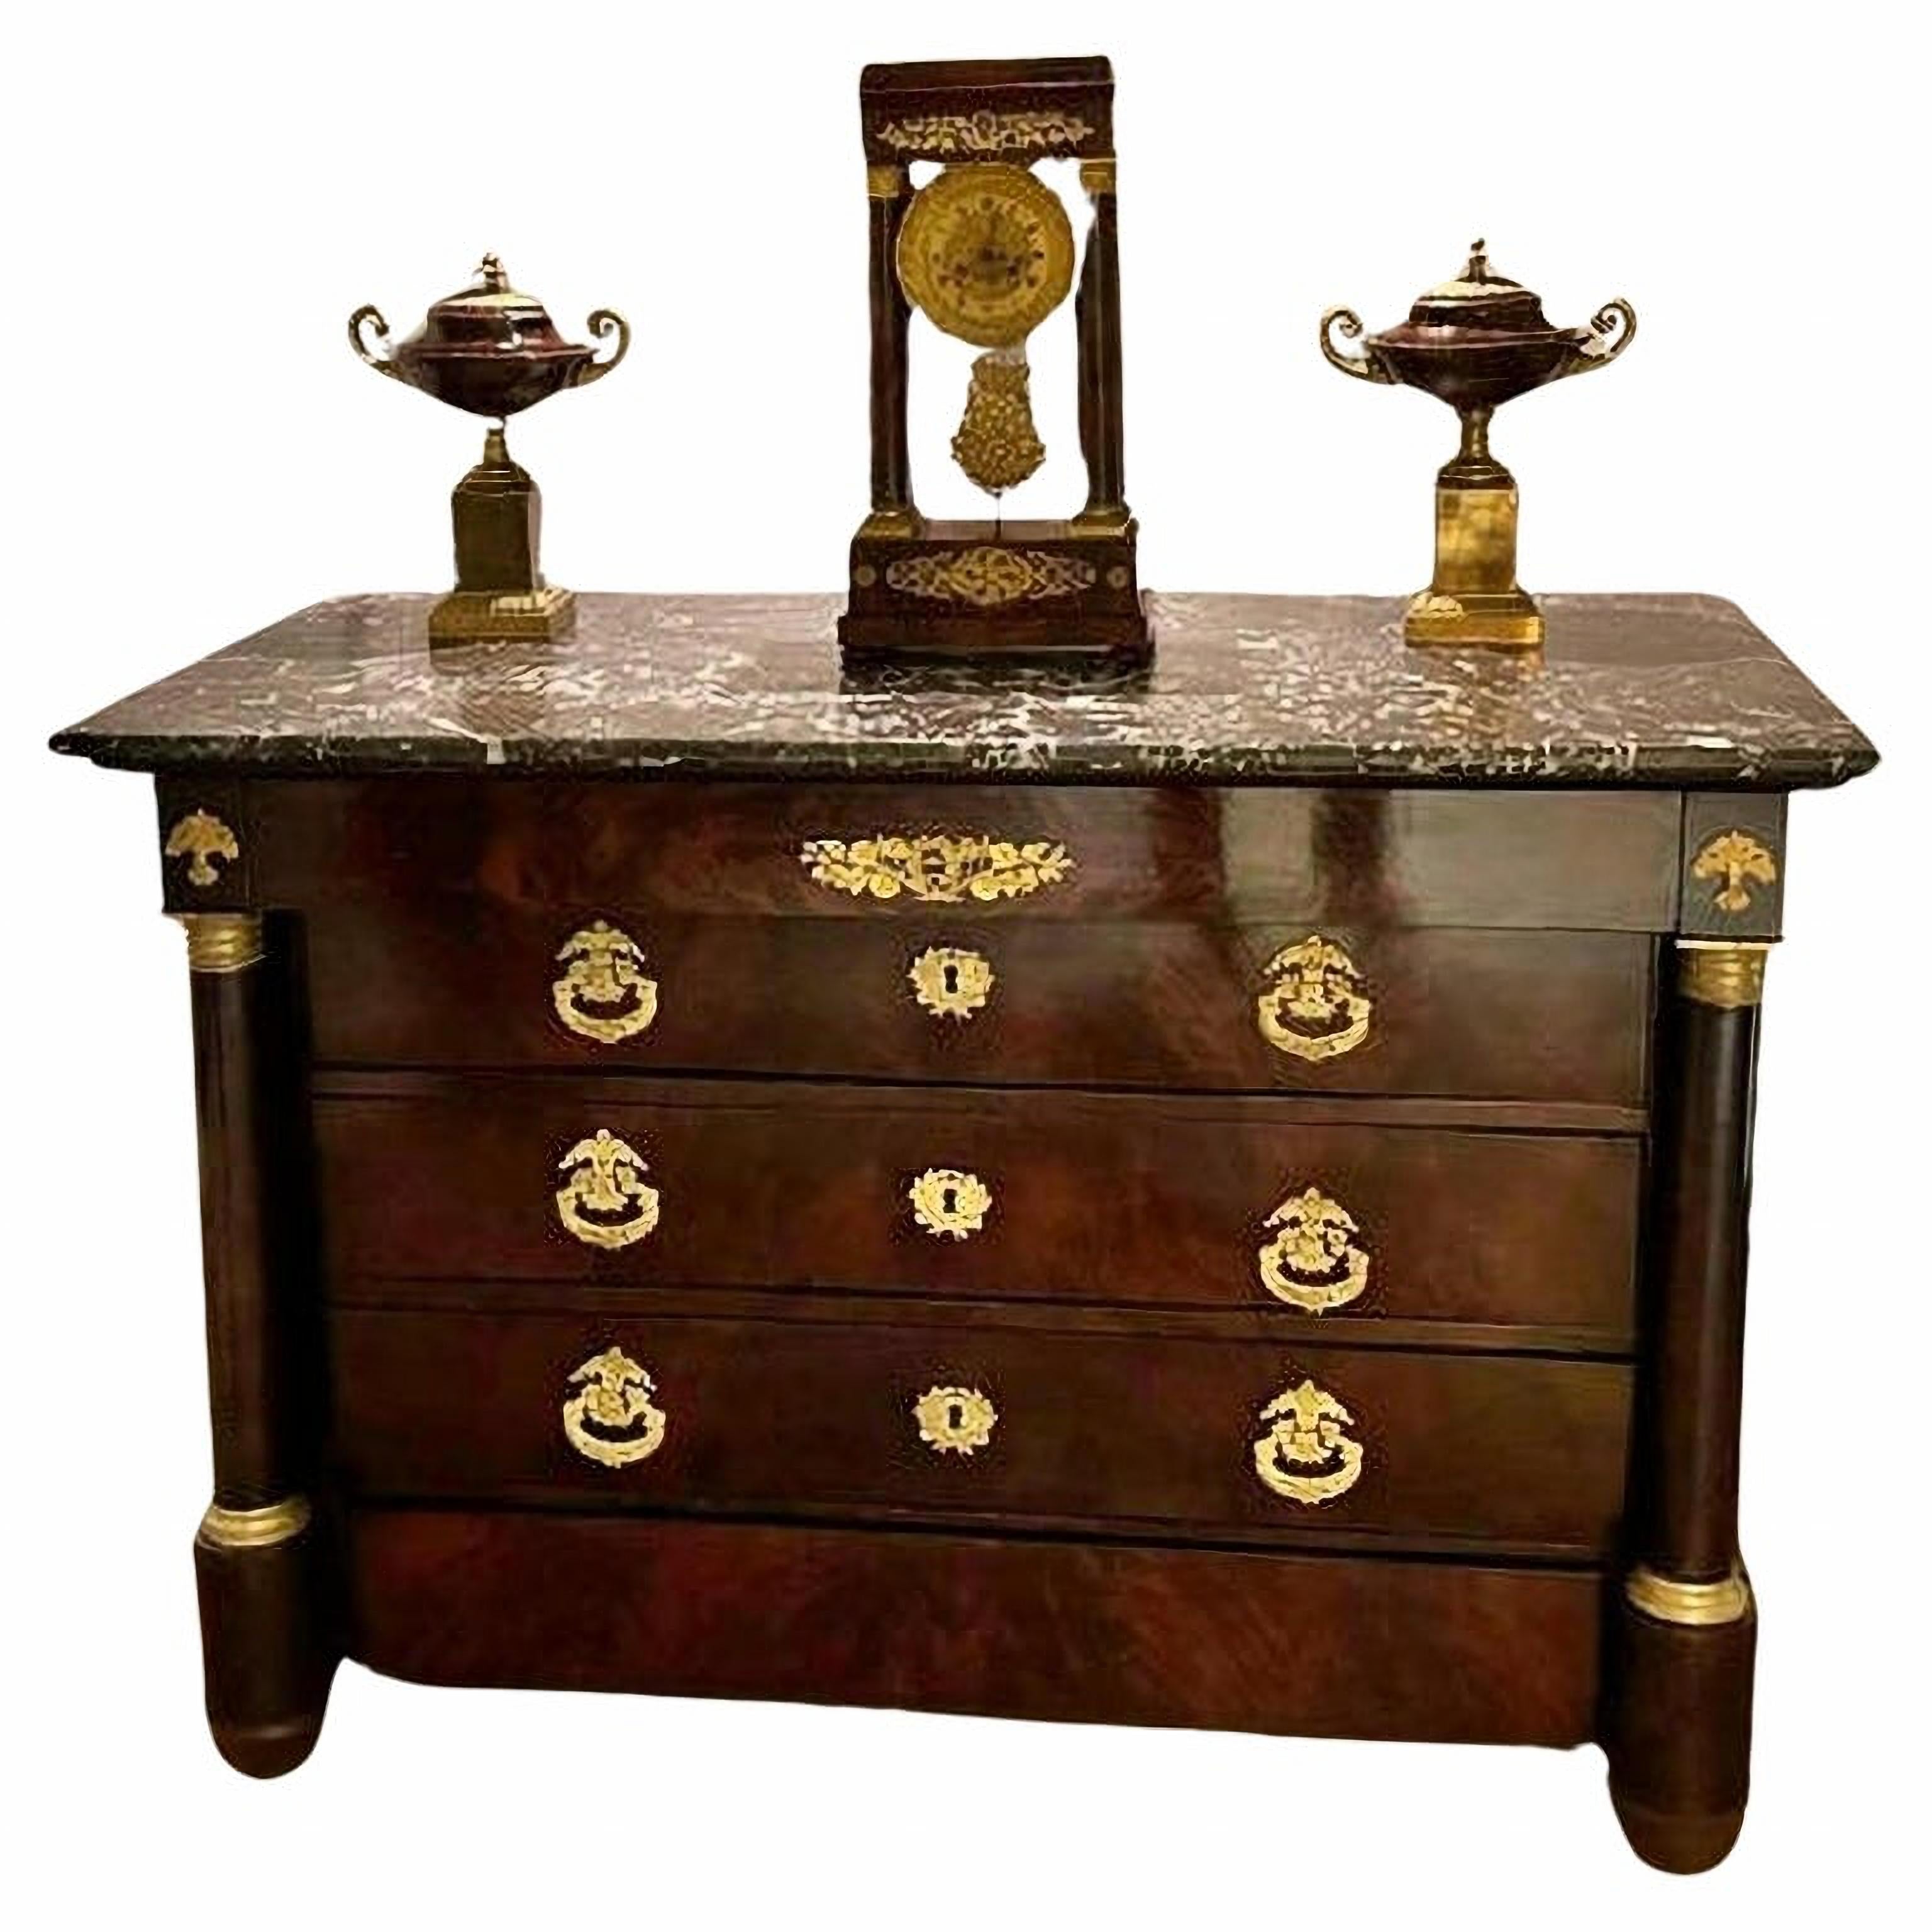 Hand-Crafted Empire Chest of Drawers in Mahogany Veneer, 19th century Napoleon III RESTAURED For Sale